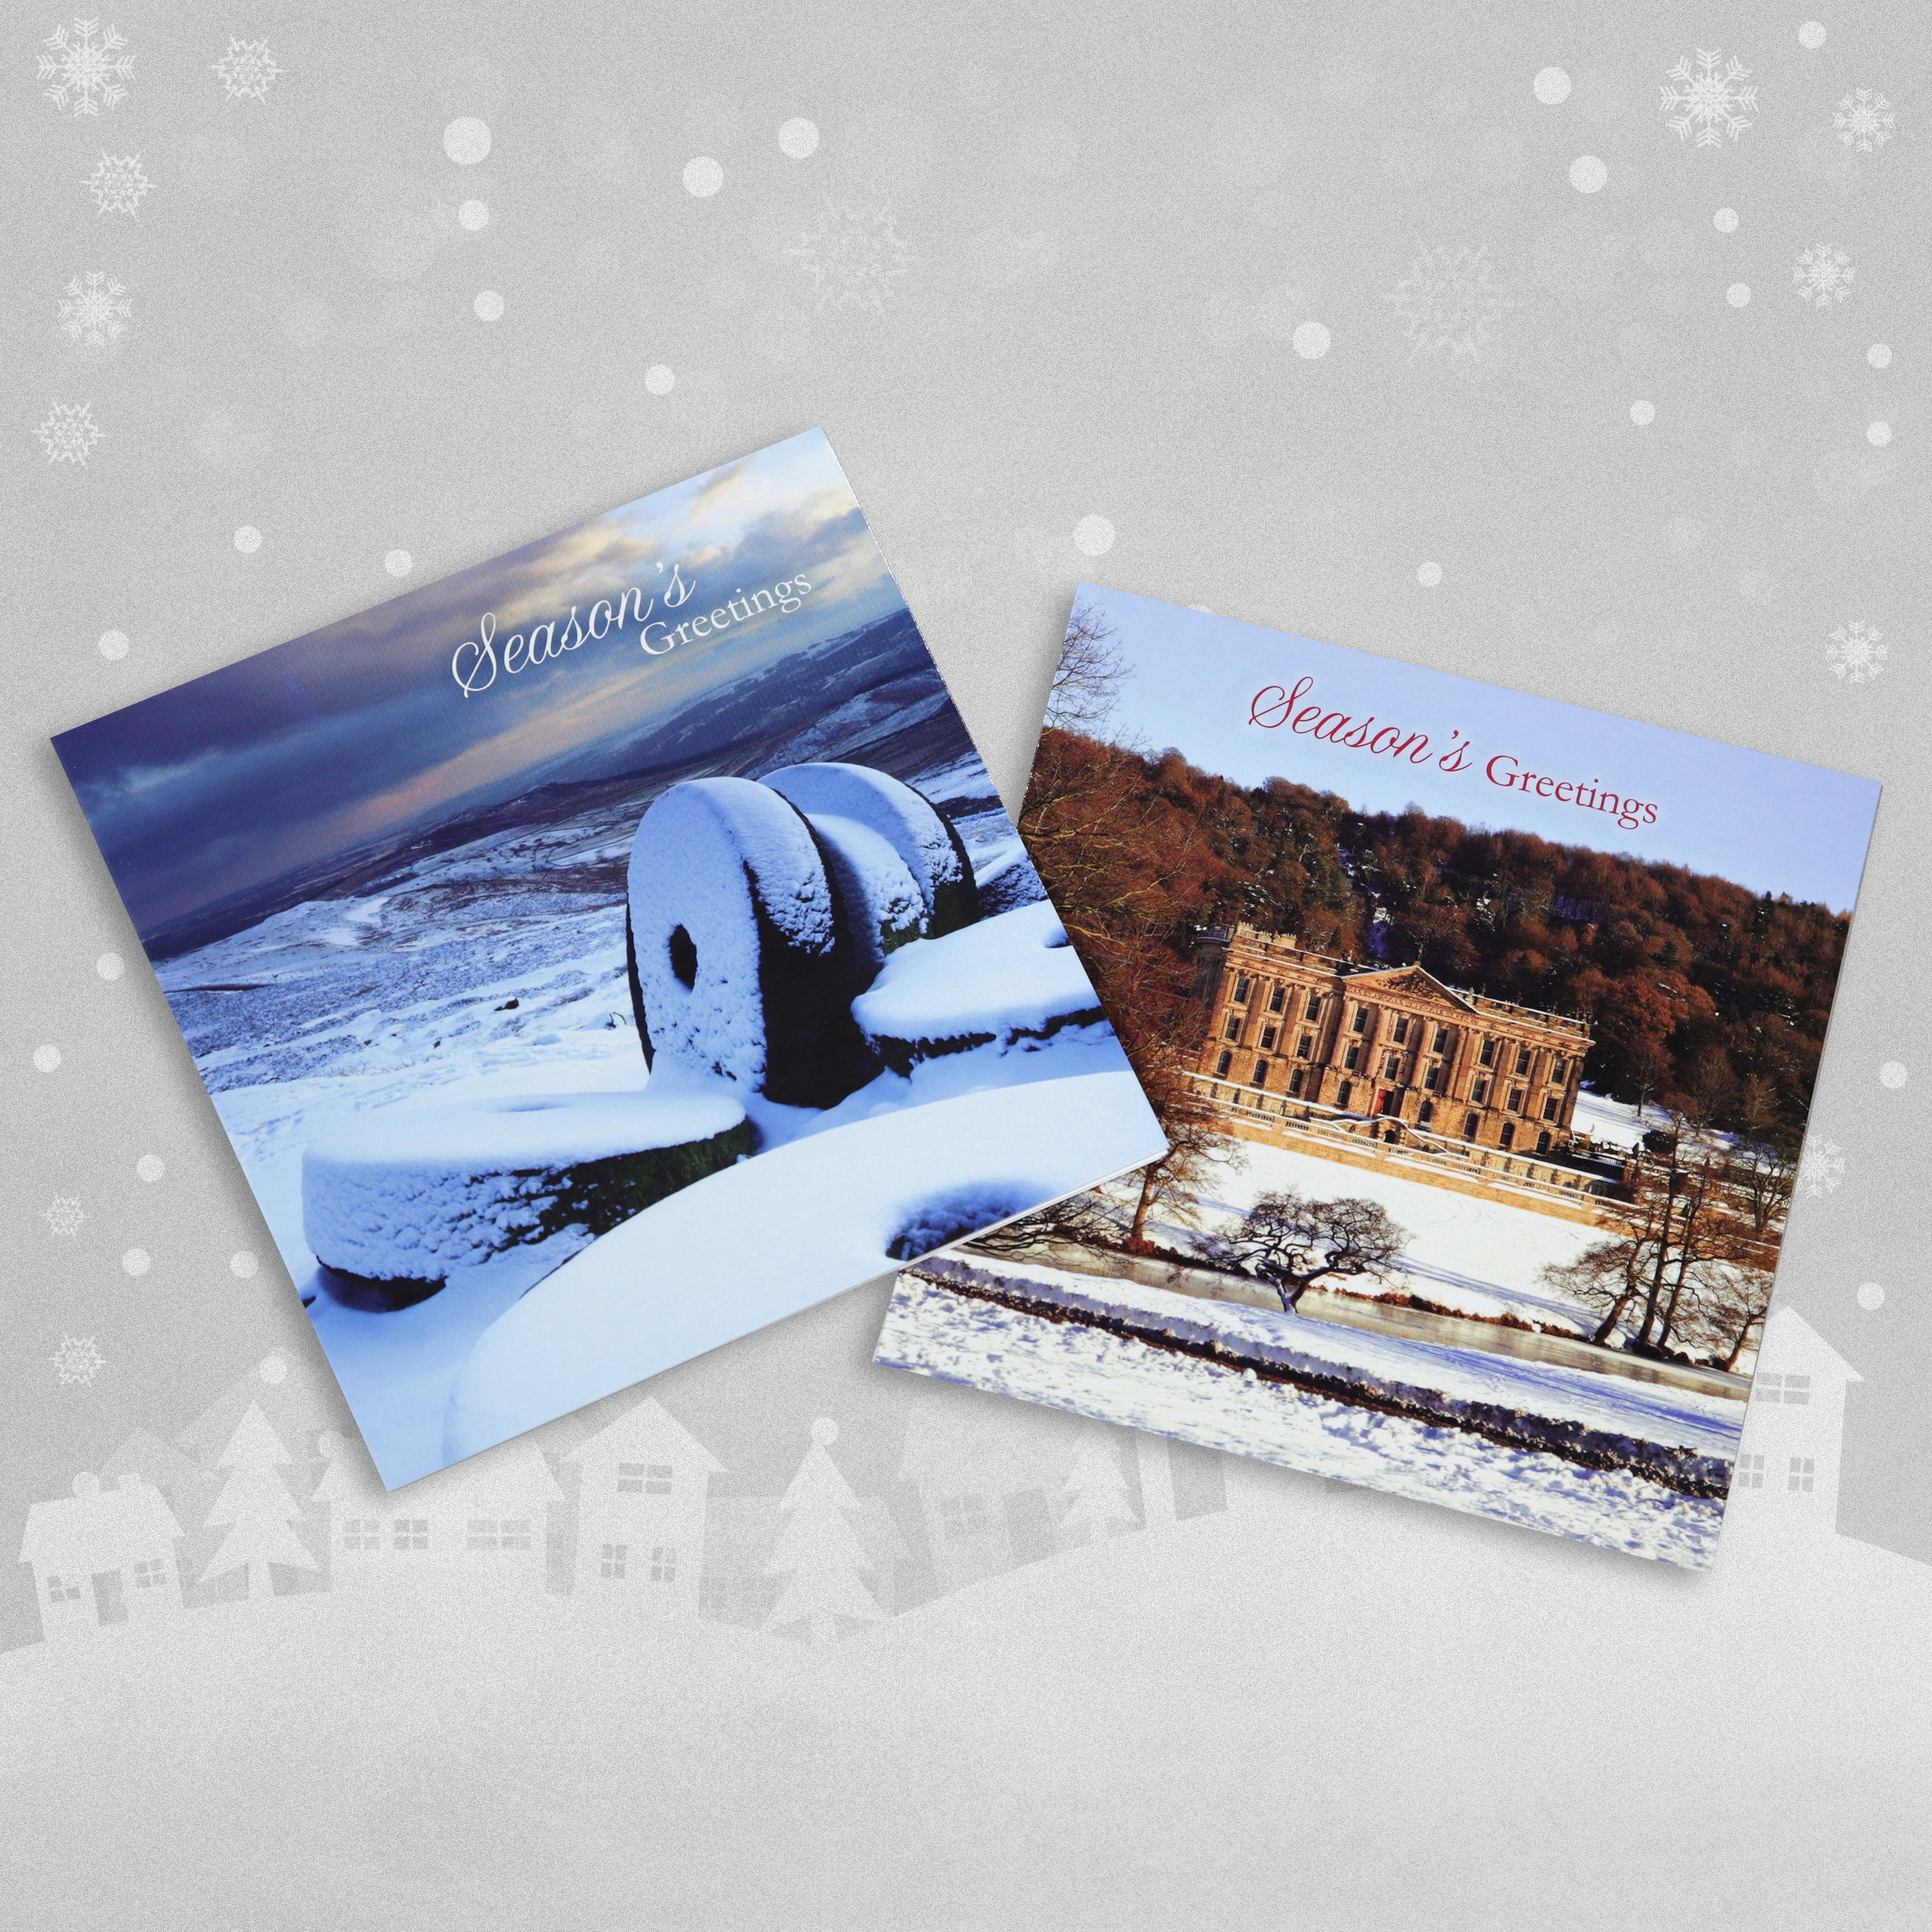 10 'Peak District' Christmas Cards - Chatsworth House & Stanage Edge